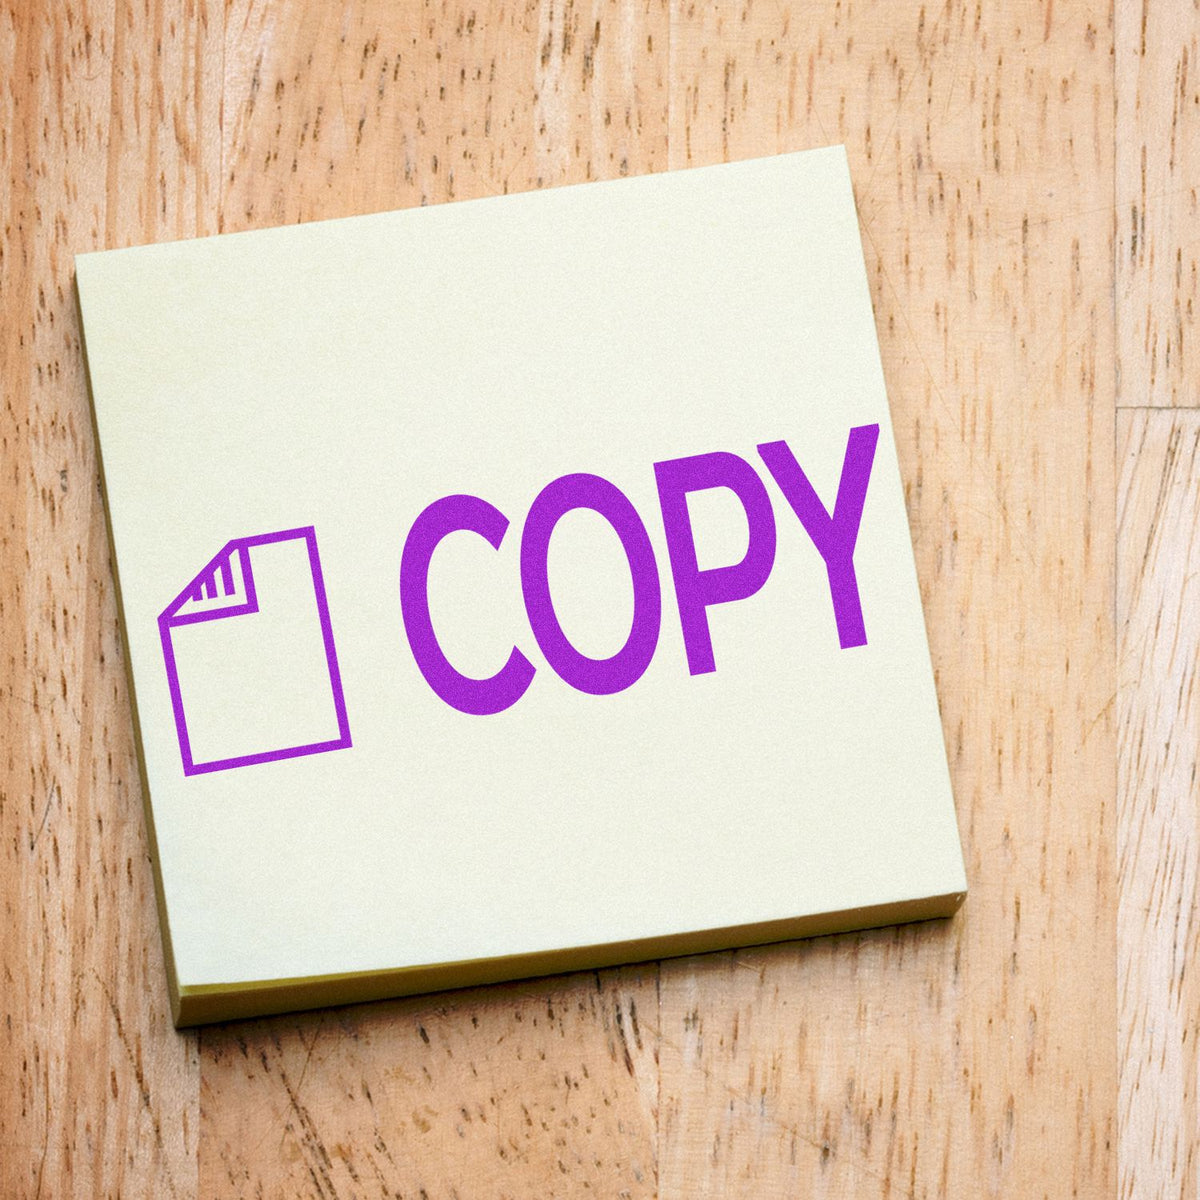 Copy with Letter Rubber Stamp In Use